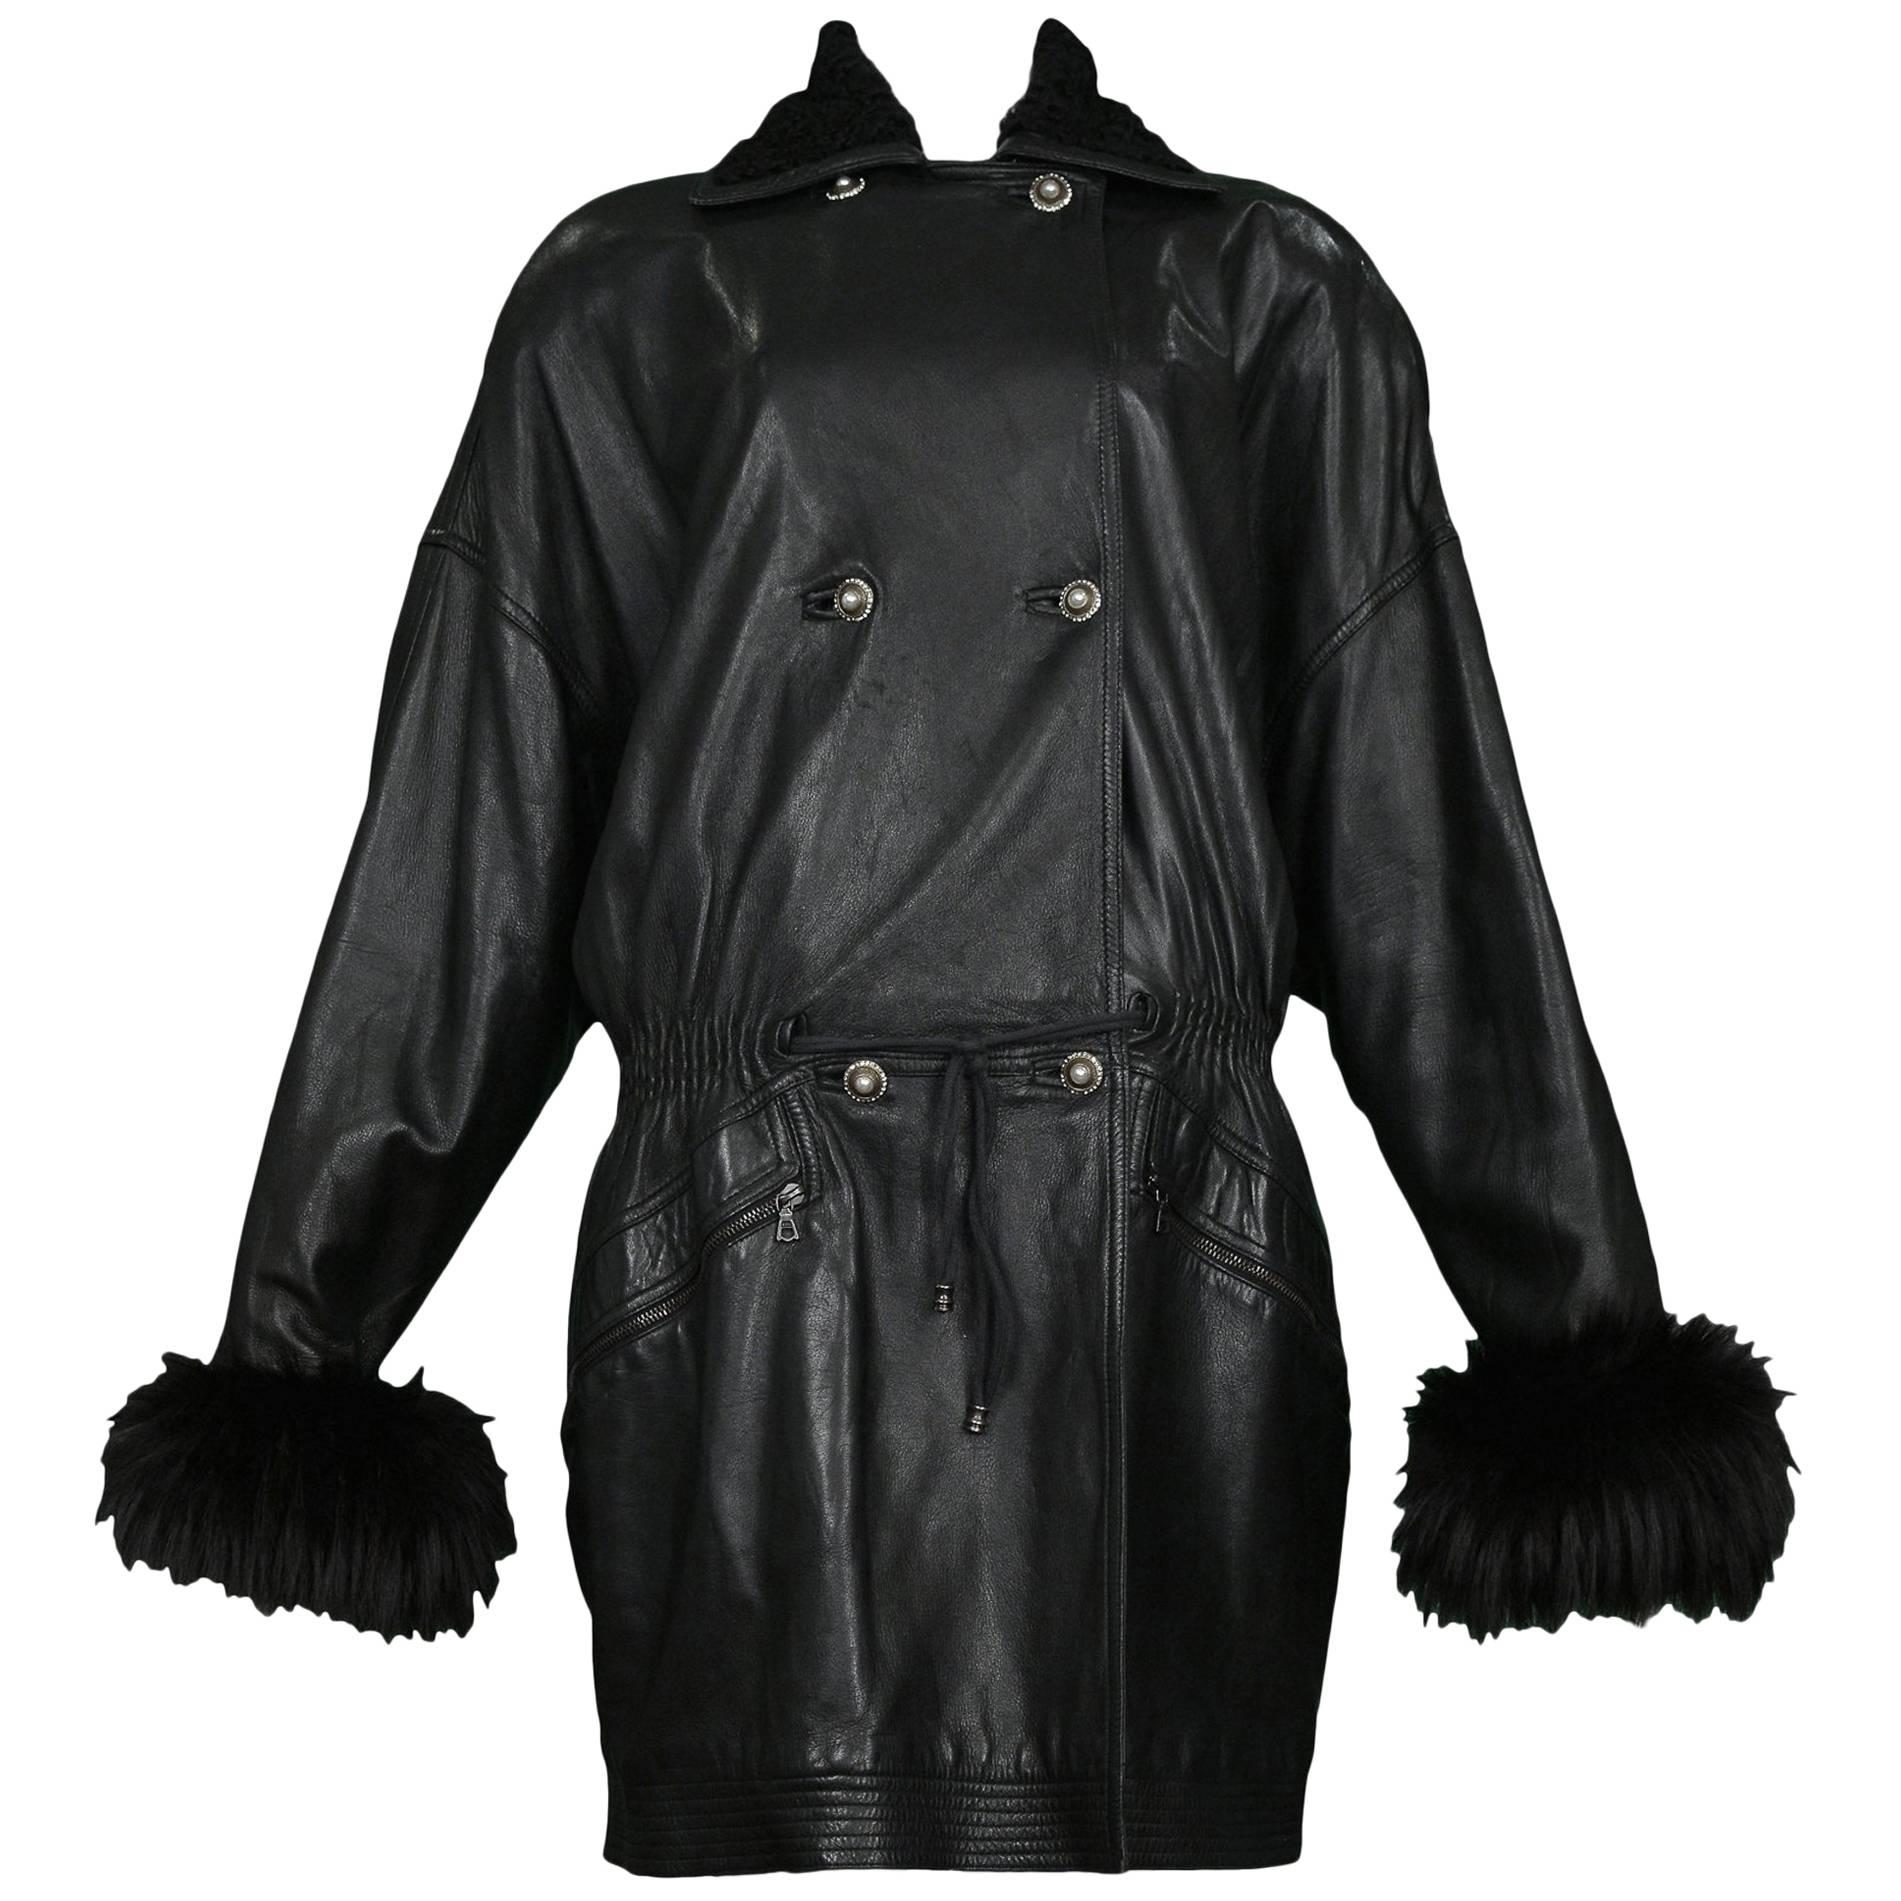 Vintage Gianni Versace Black Leather Parka Coat with Fur Cuffs & Collar For Sale